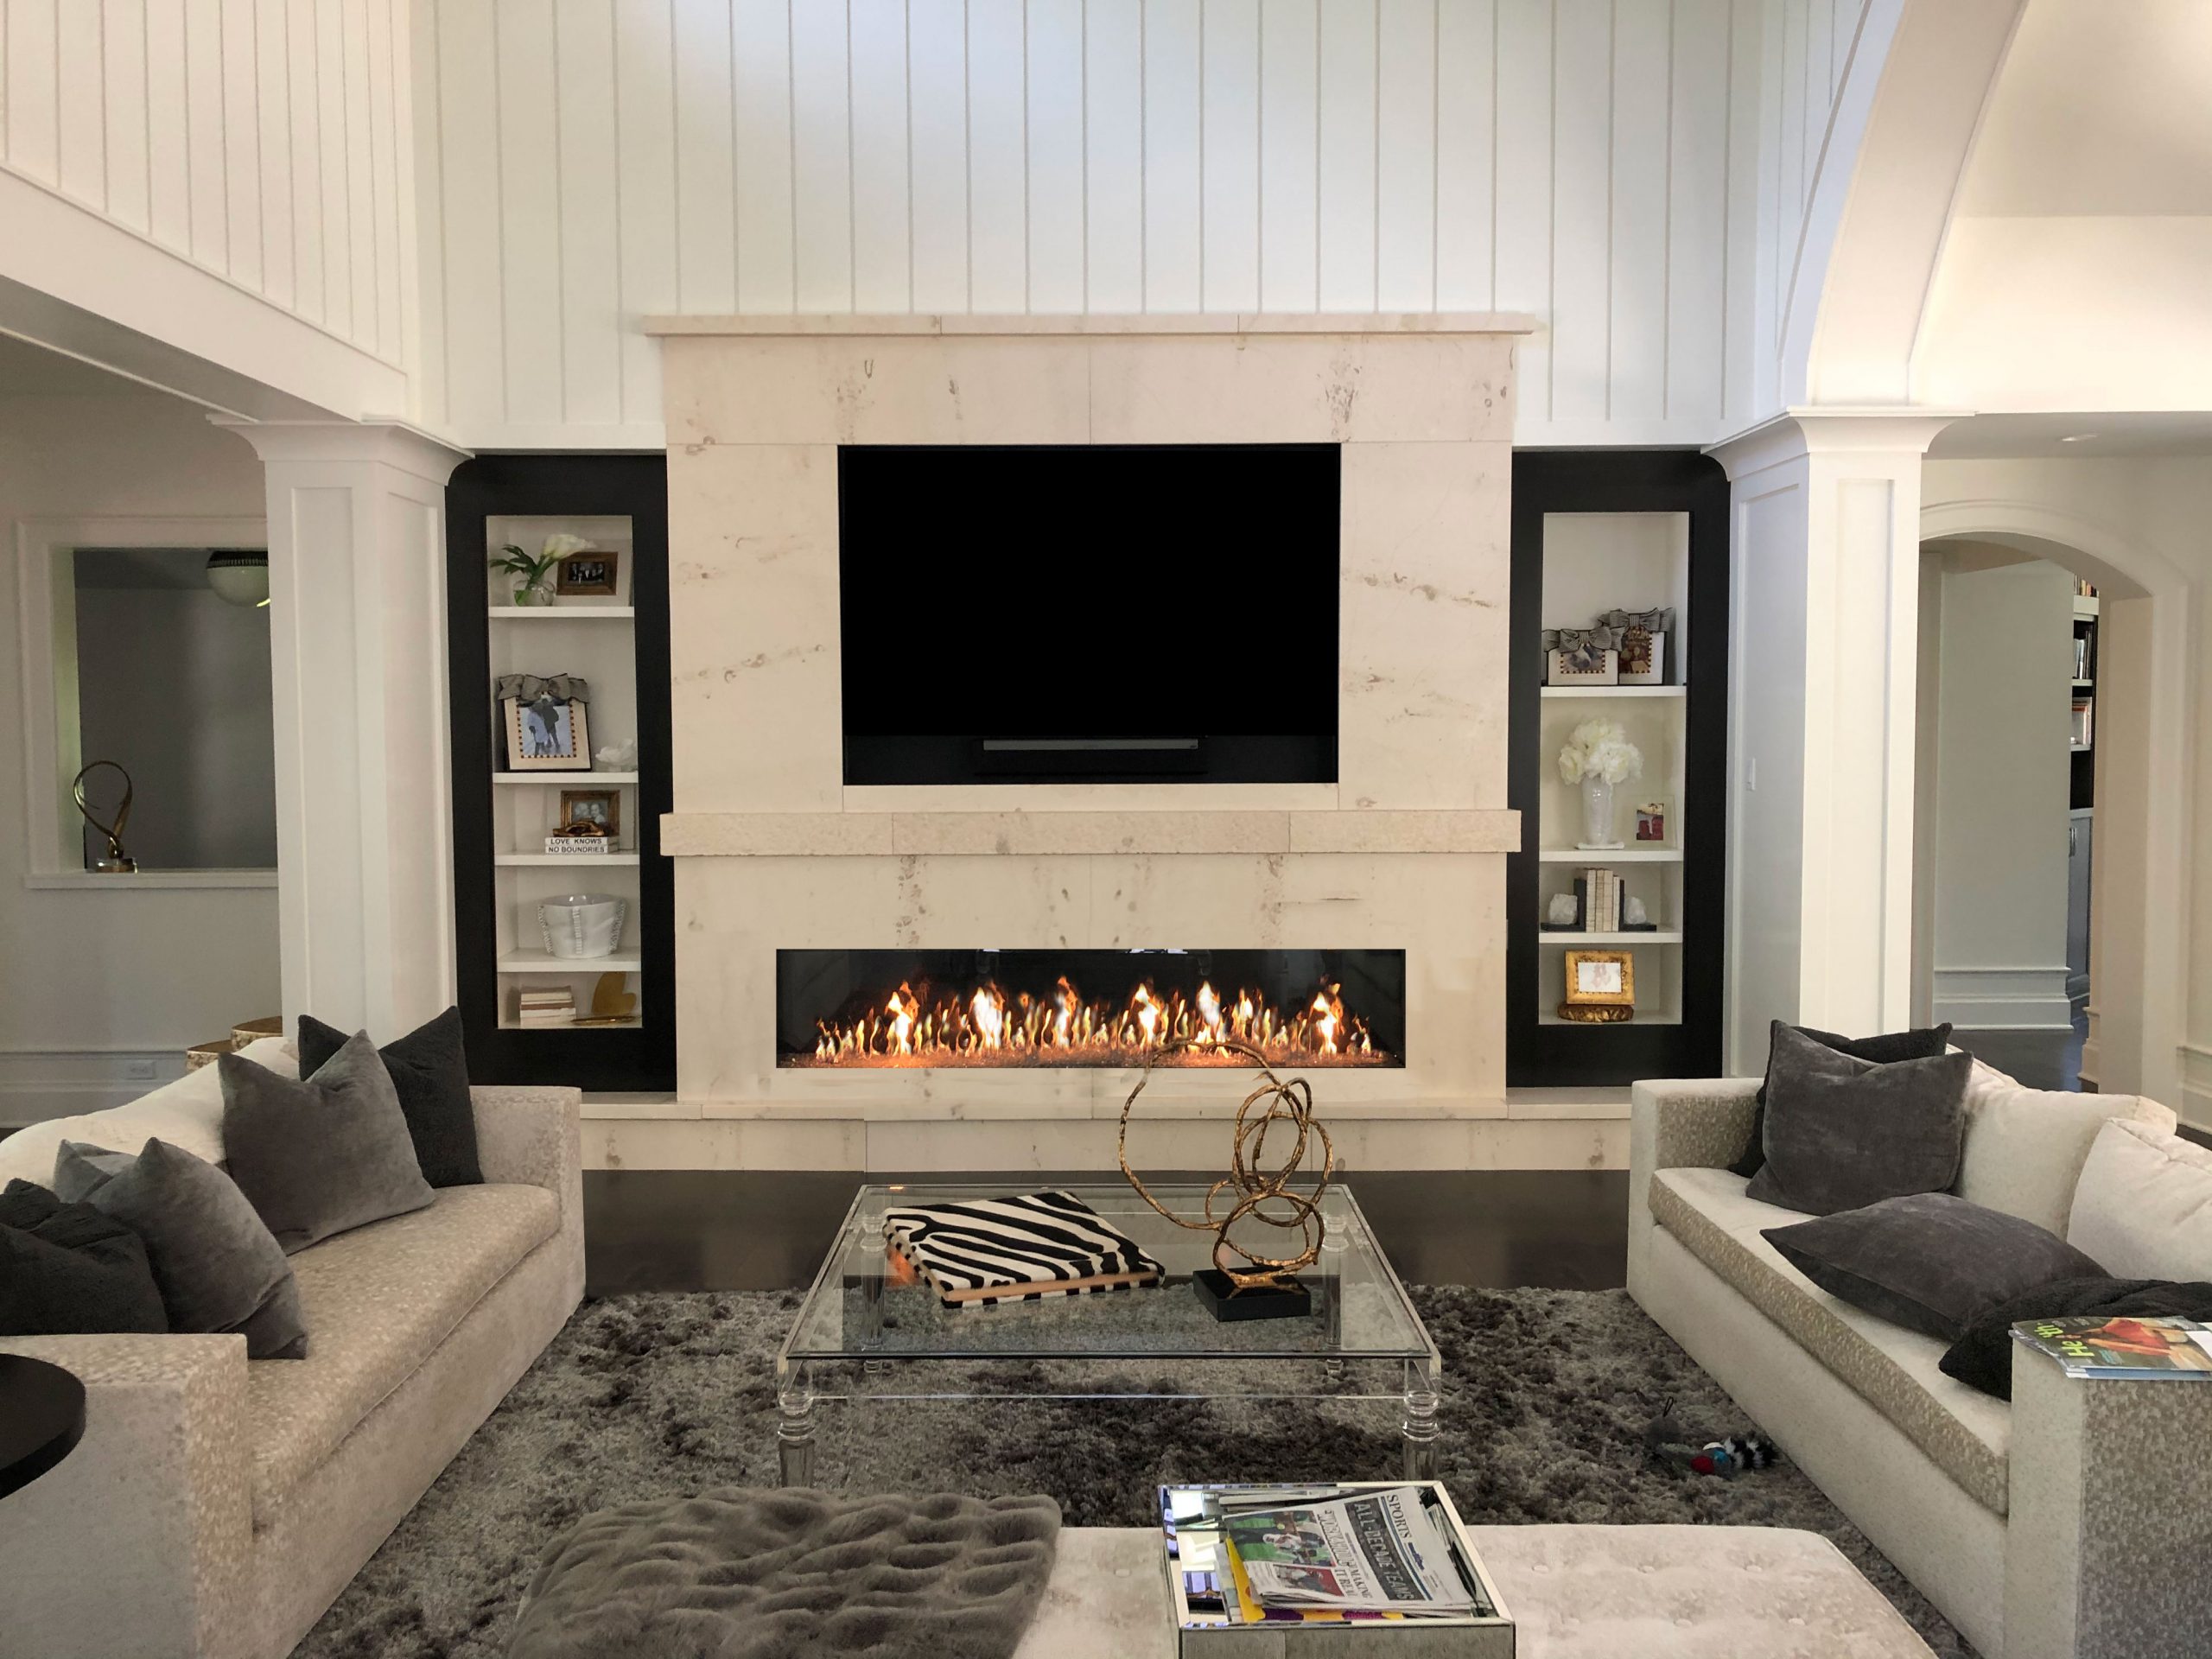 Acucraft Signature 8' Single Sided Linear Gas Fireplace with Starfire Glass Media